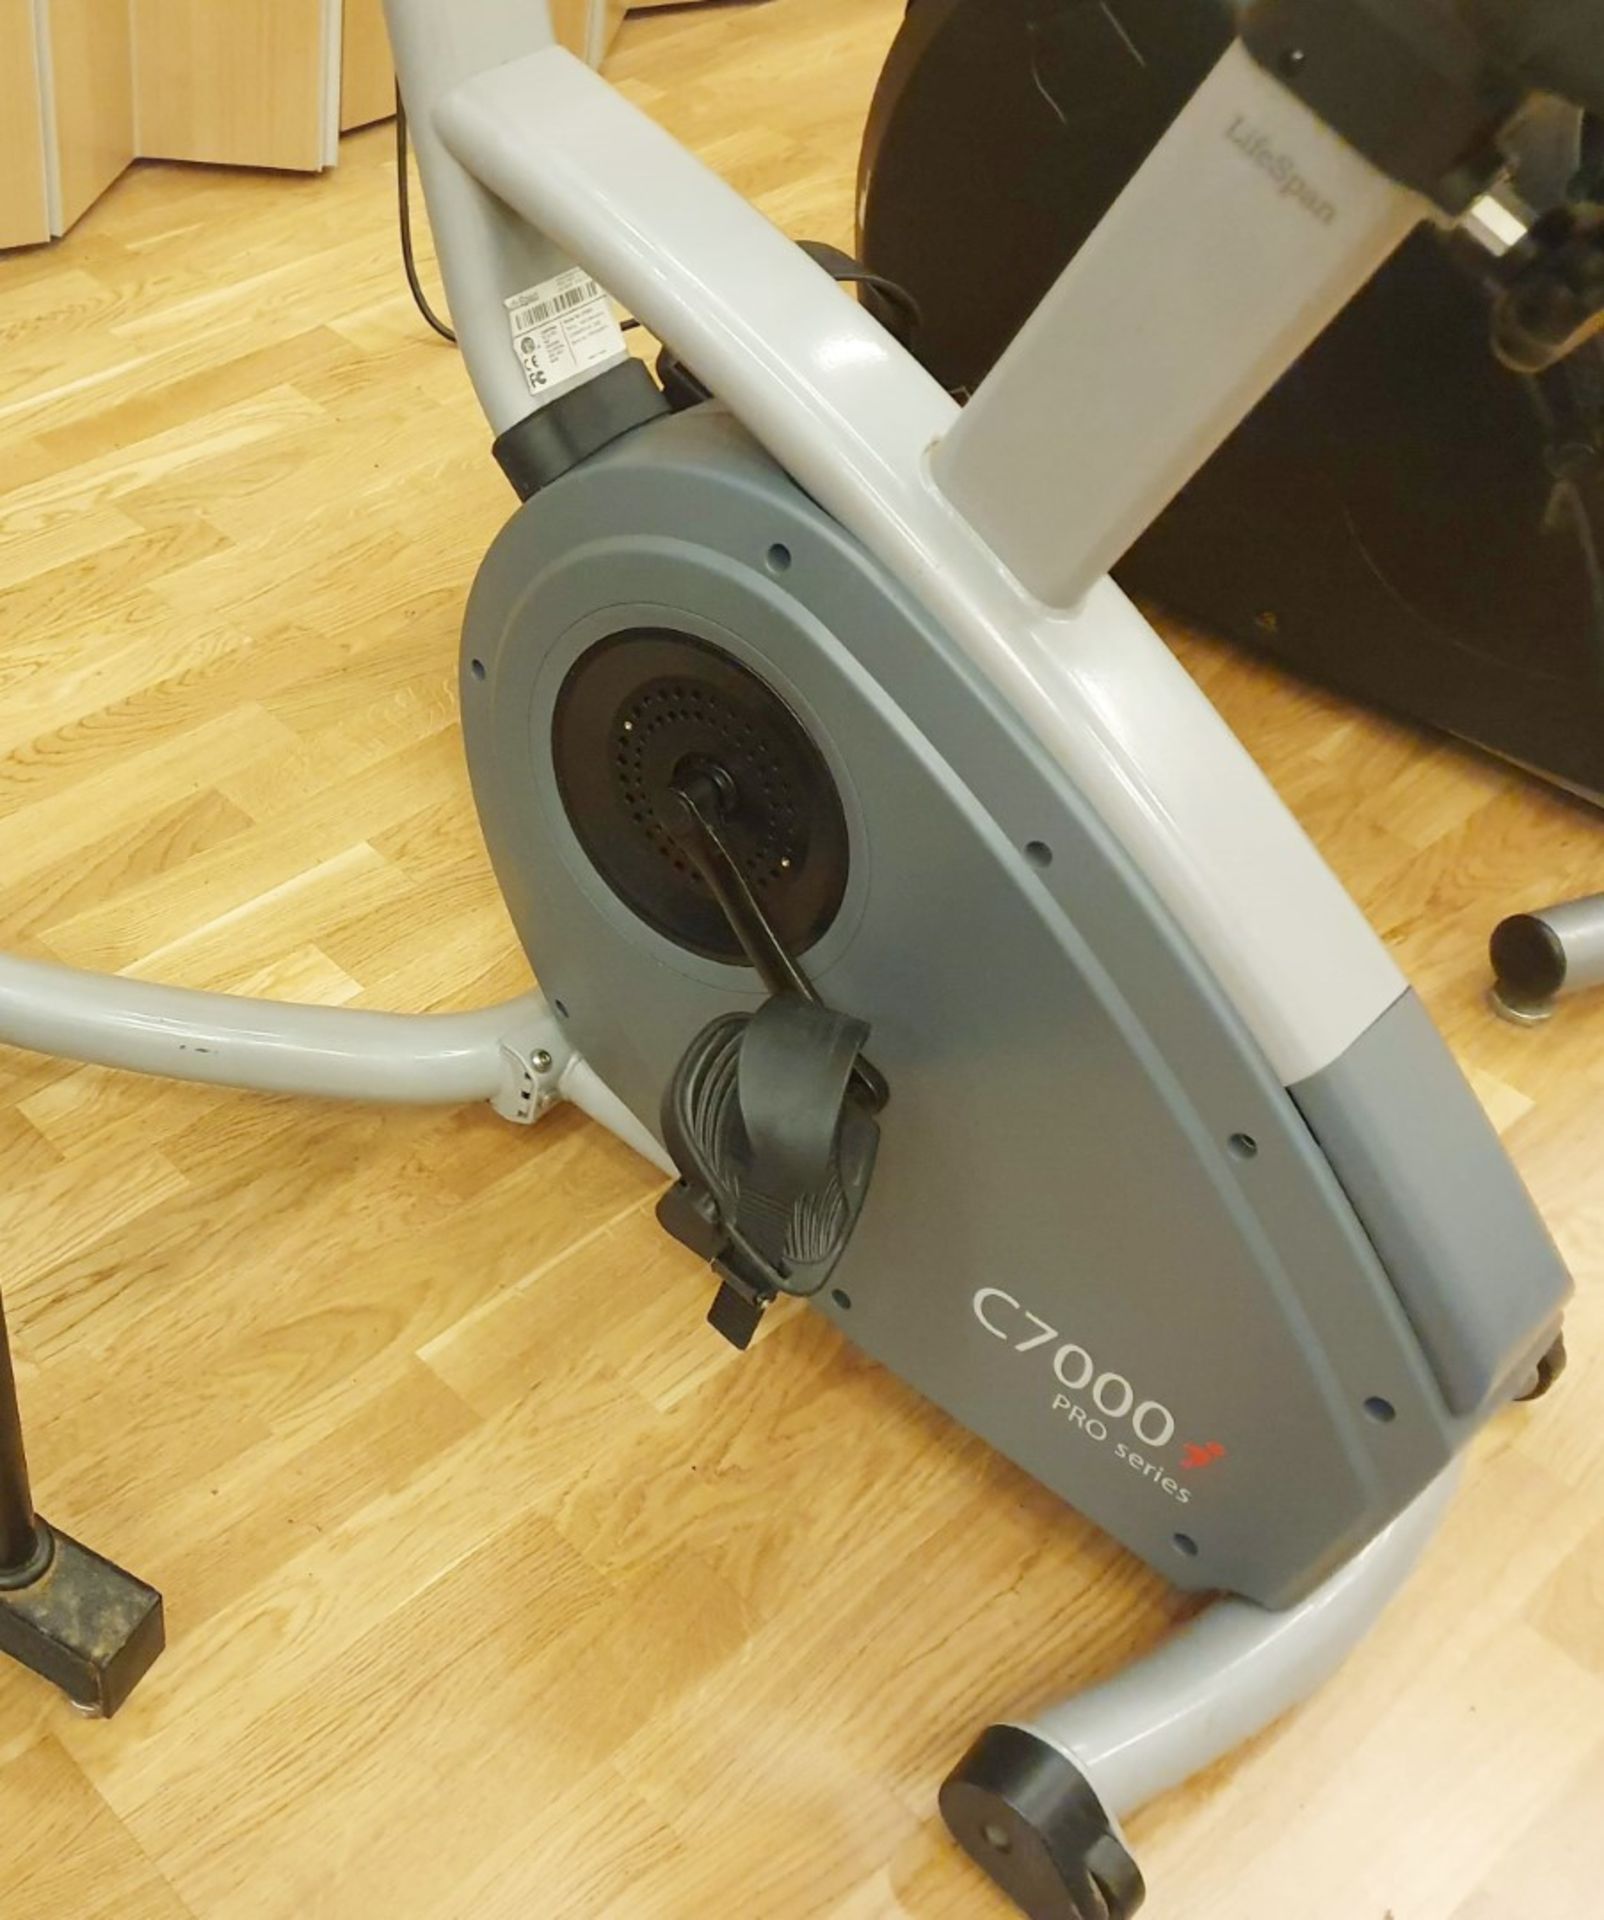 1 x Lifespan C7000 Pro Series Exercise Bike With USB Connectivity - Approx RRP £1,400 - CL552 - - Image 2 of 6